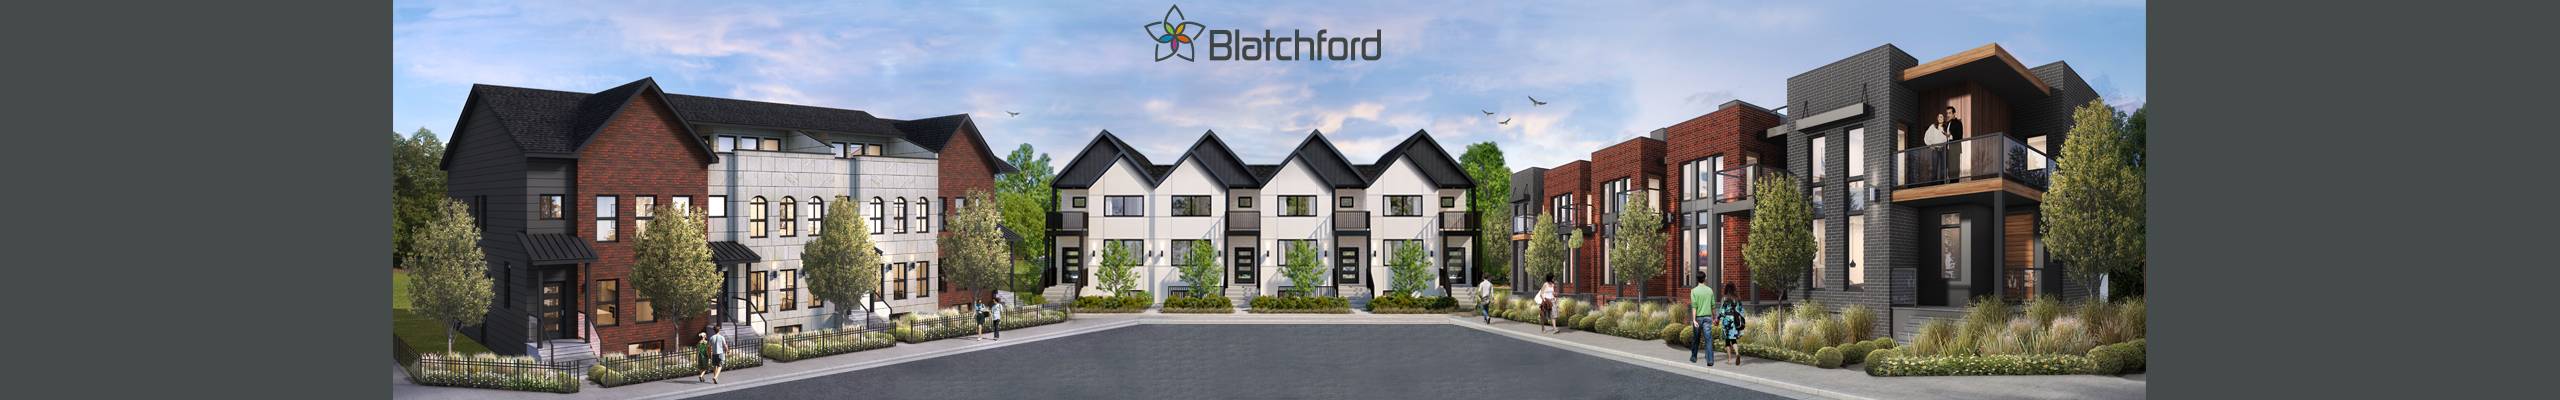 Blatchford - New Units Available Now